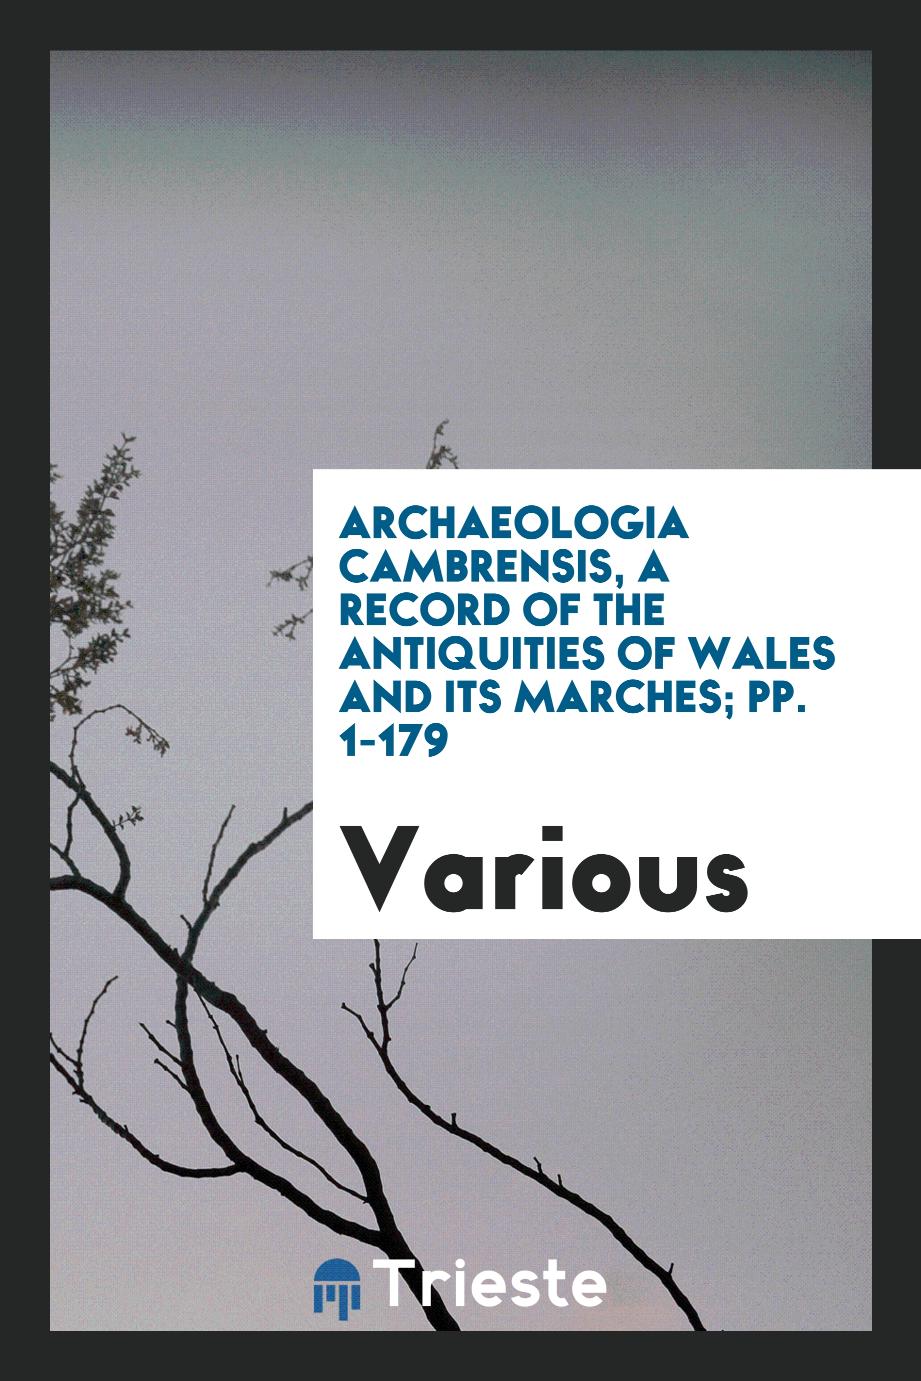 Archaeologia Cambrensis, a Record of the Antiquities of Wales and Its Marches; pp. 1-179